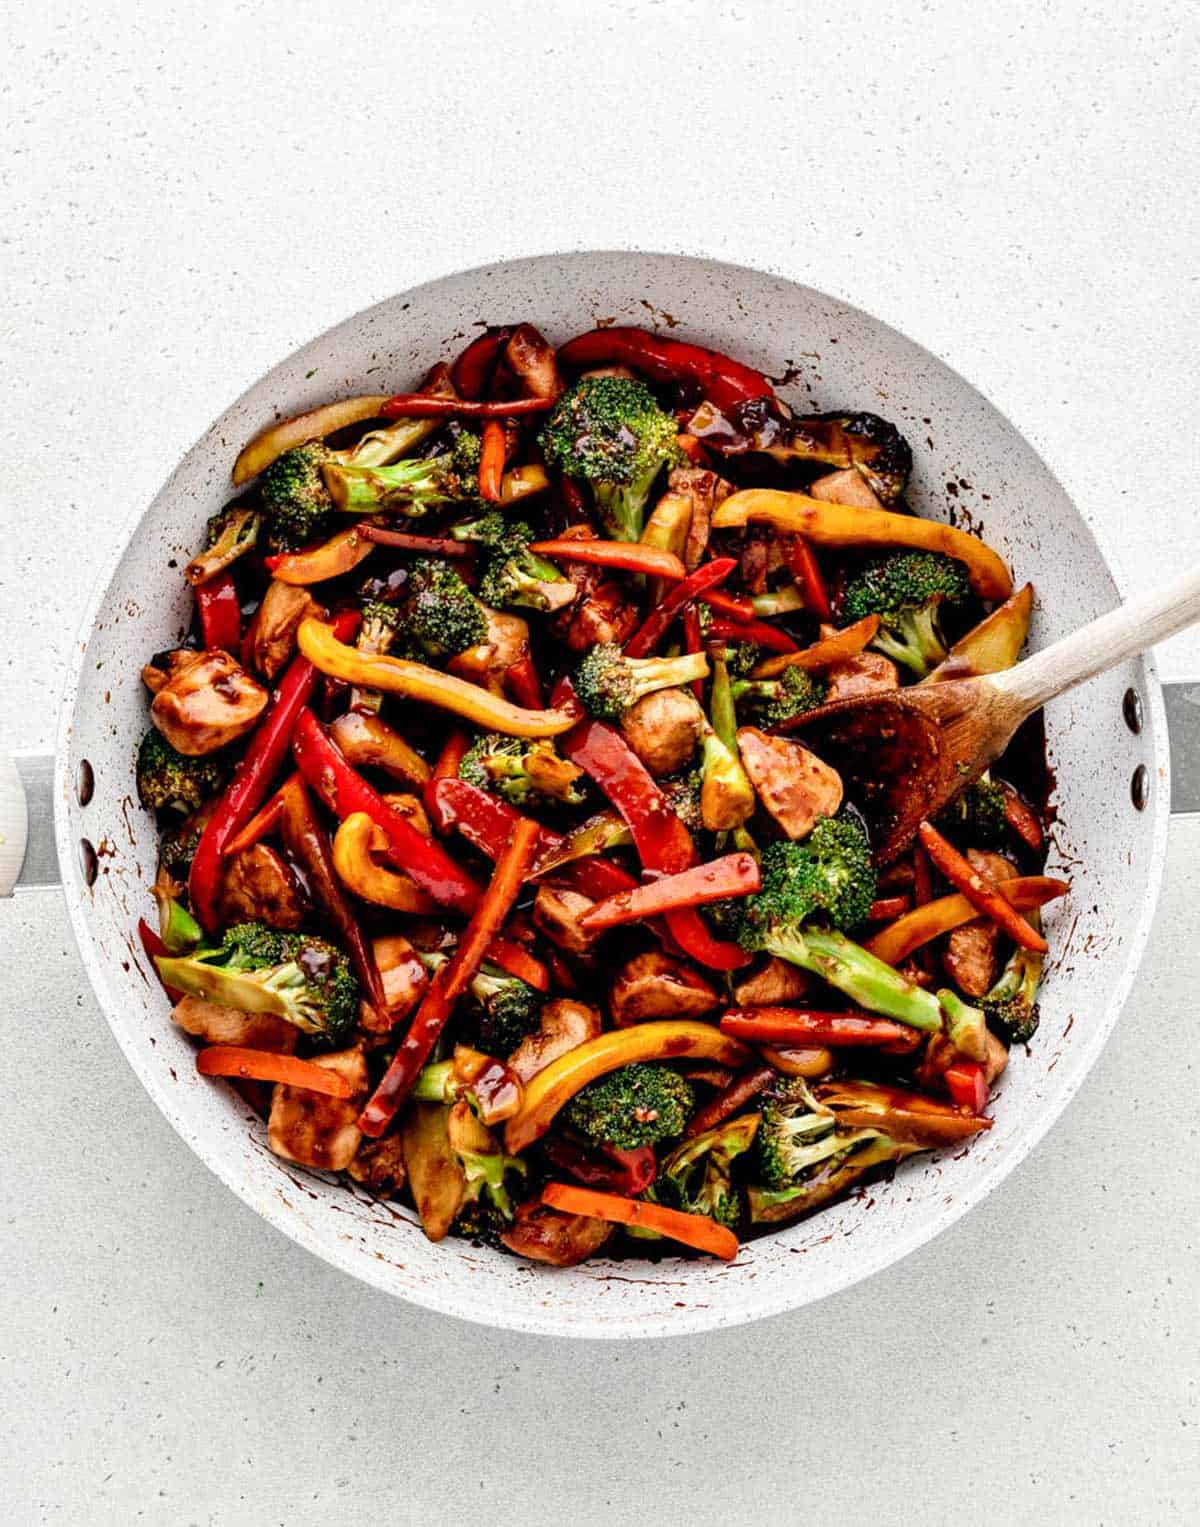 A pan of healthy stir fry with chicken, cooking in the stir fry sauce.